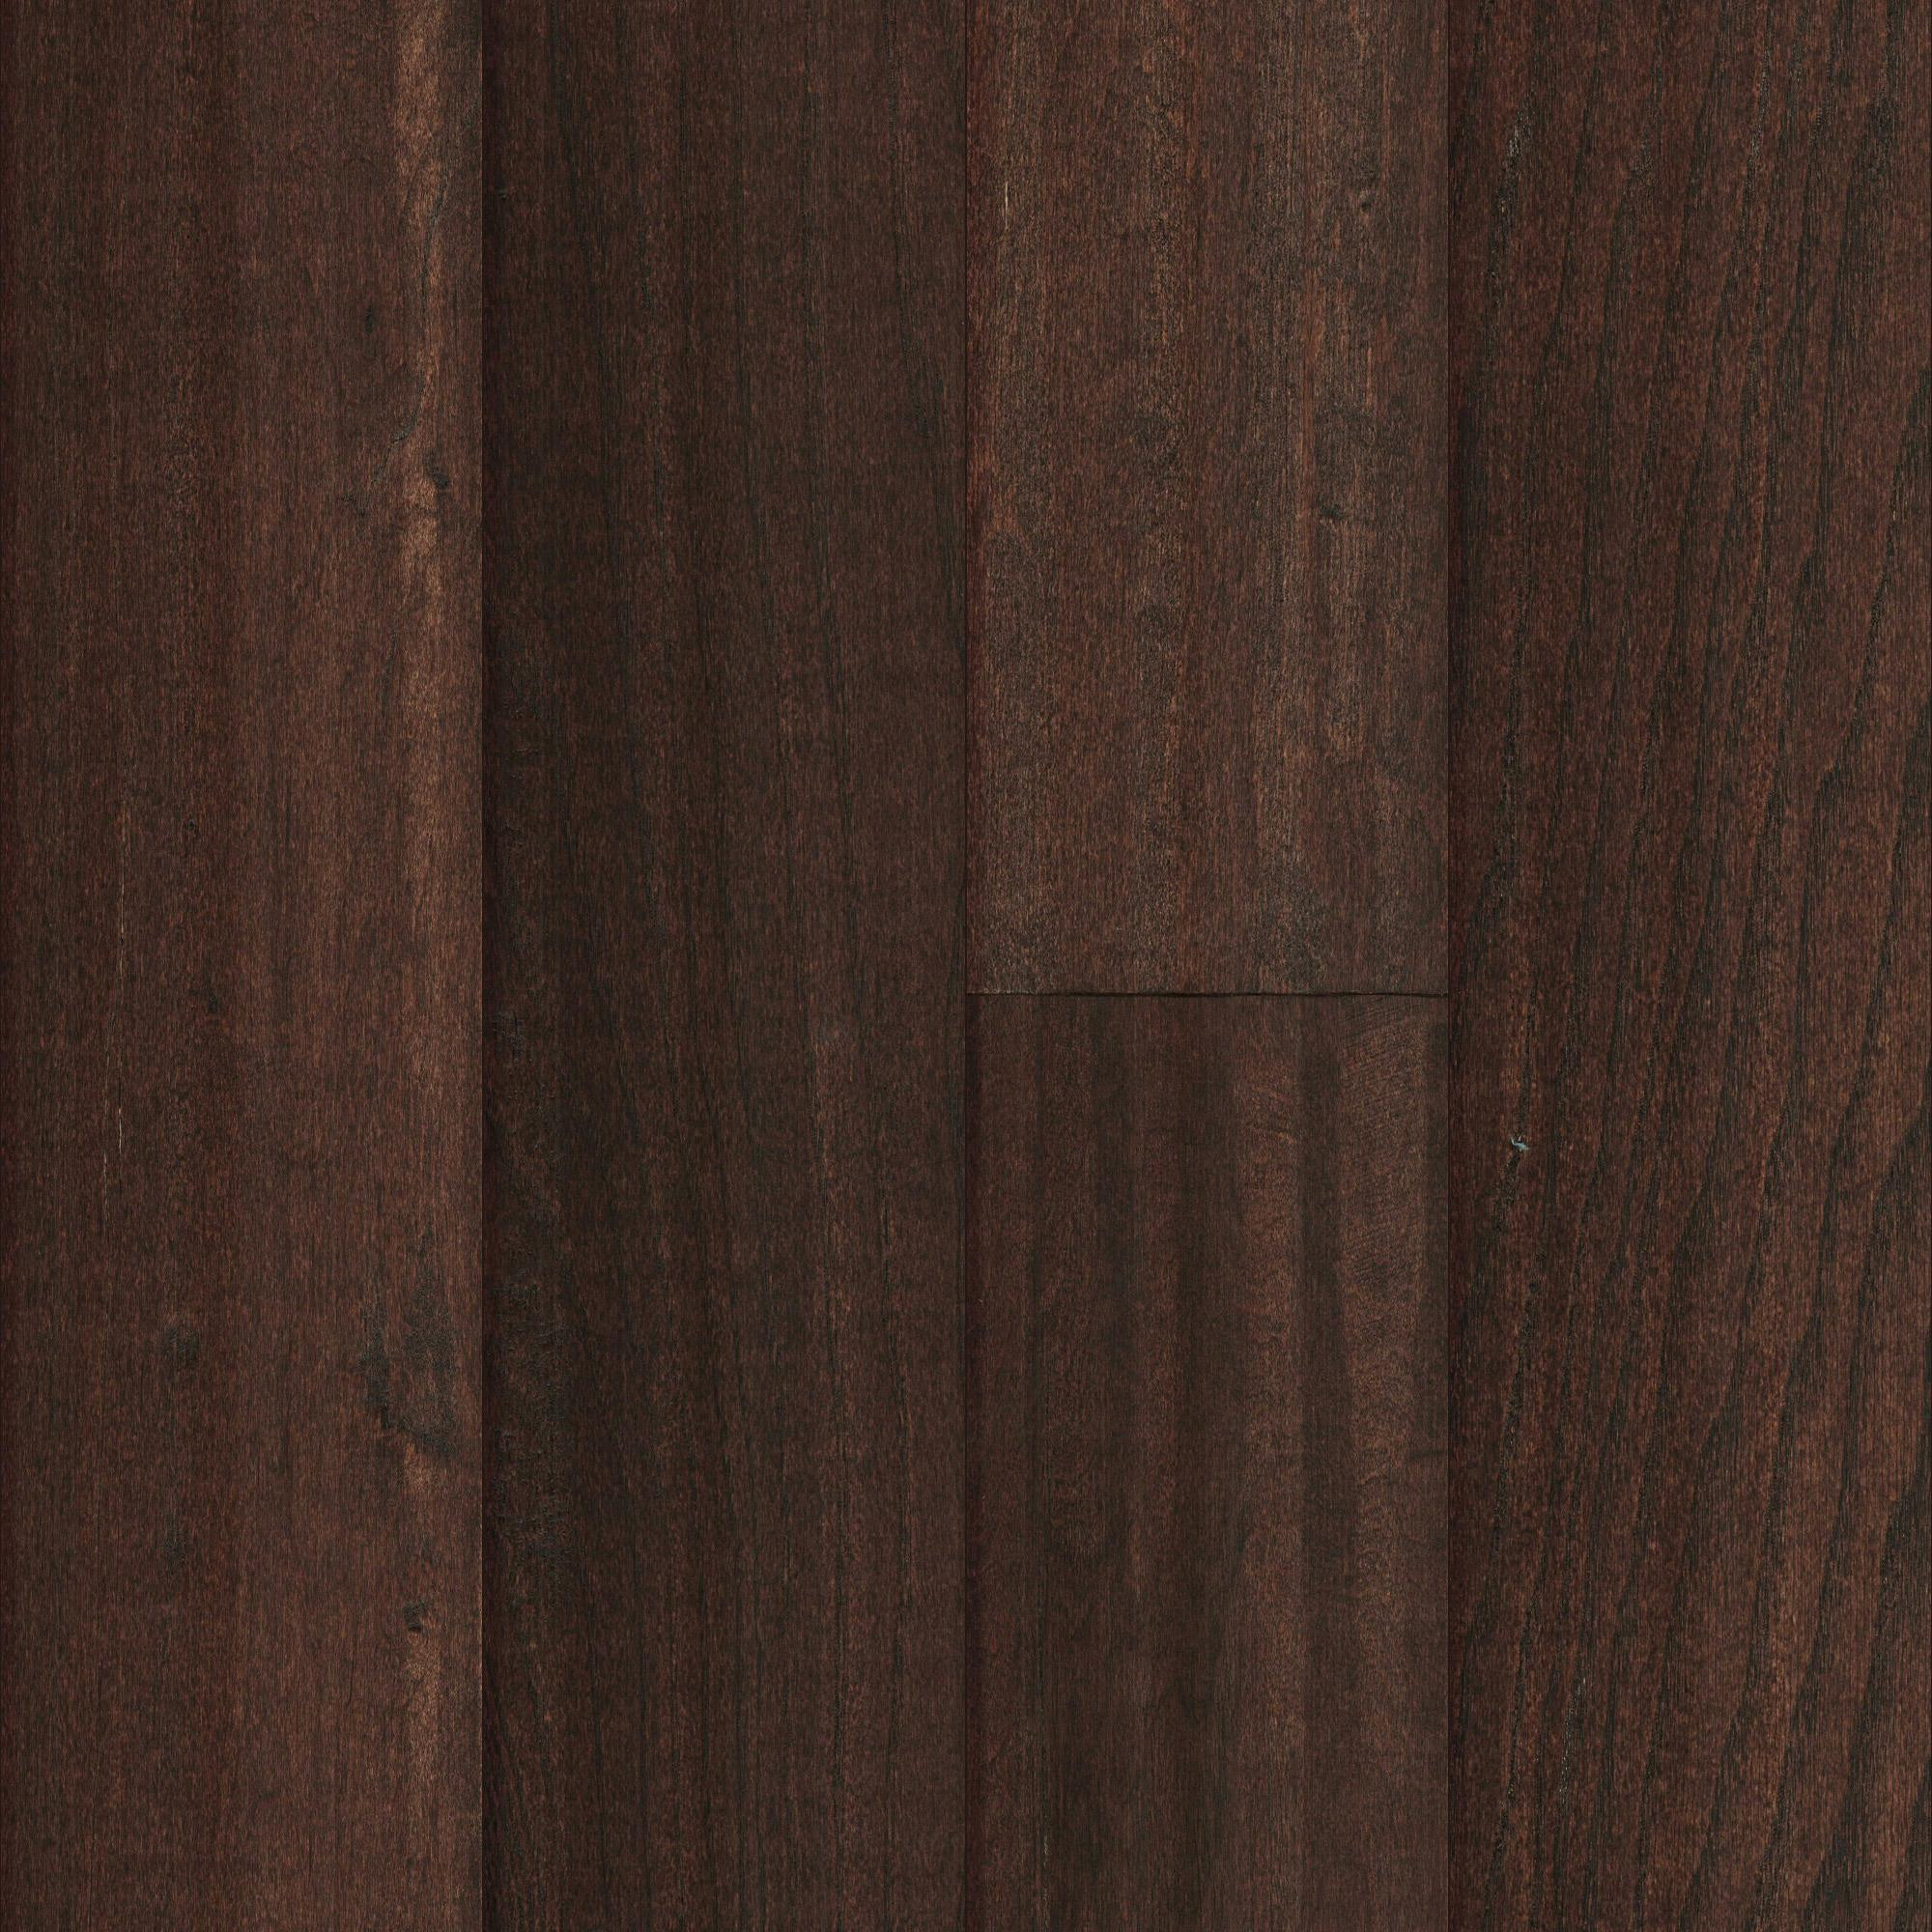 armstrong vs bruce hardwood flooring of mullican lincolnshire sculpted maple cappuccino 5 engineered with regard to mullican lincolnshire sculpted maple cappuccino 5 engineered hardwood flooring